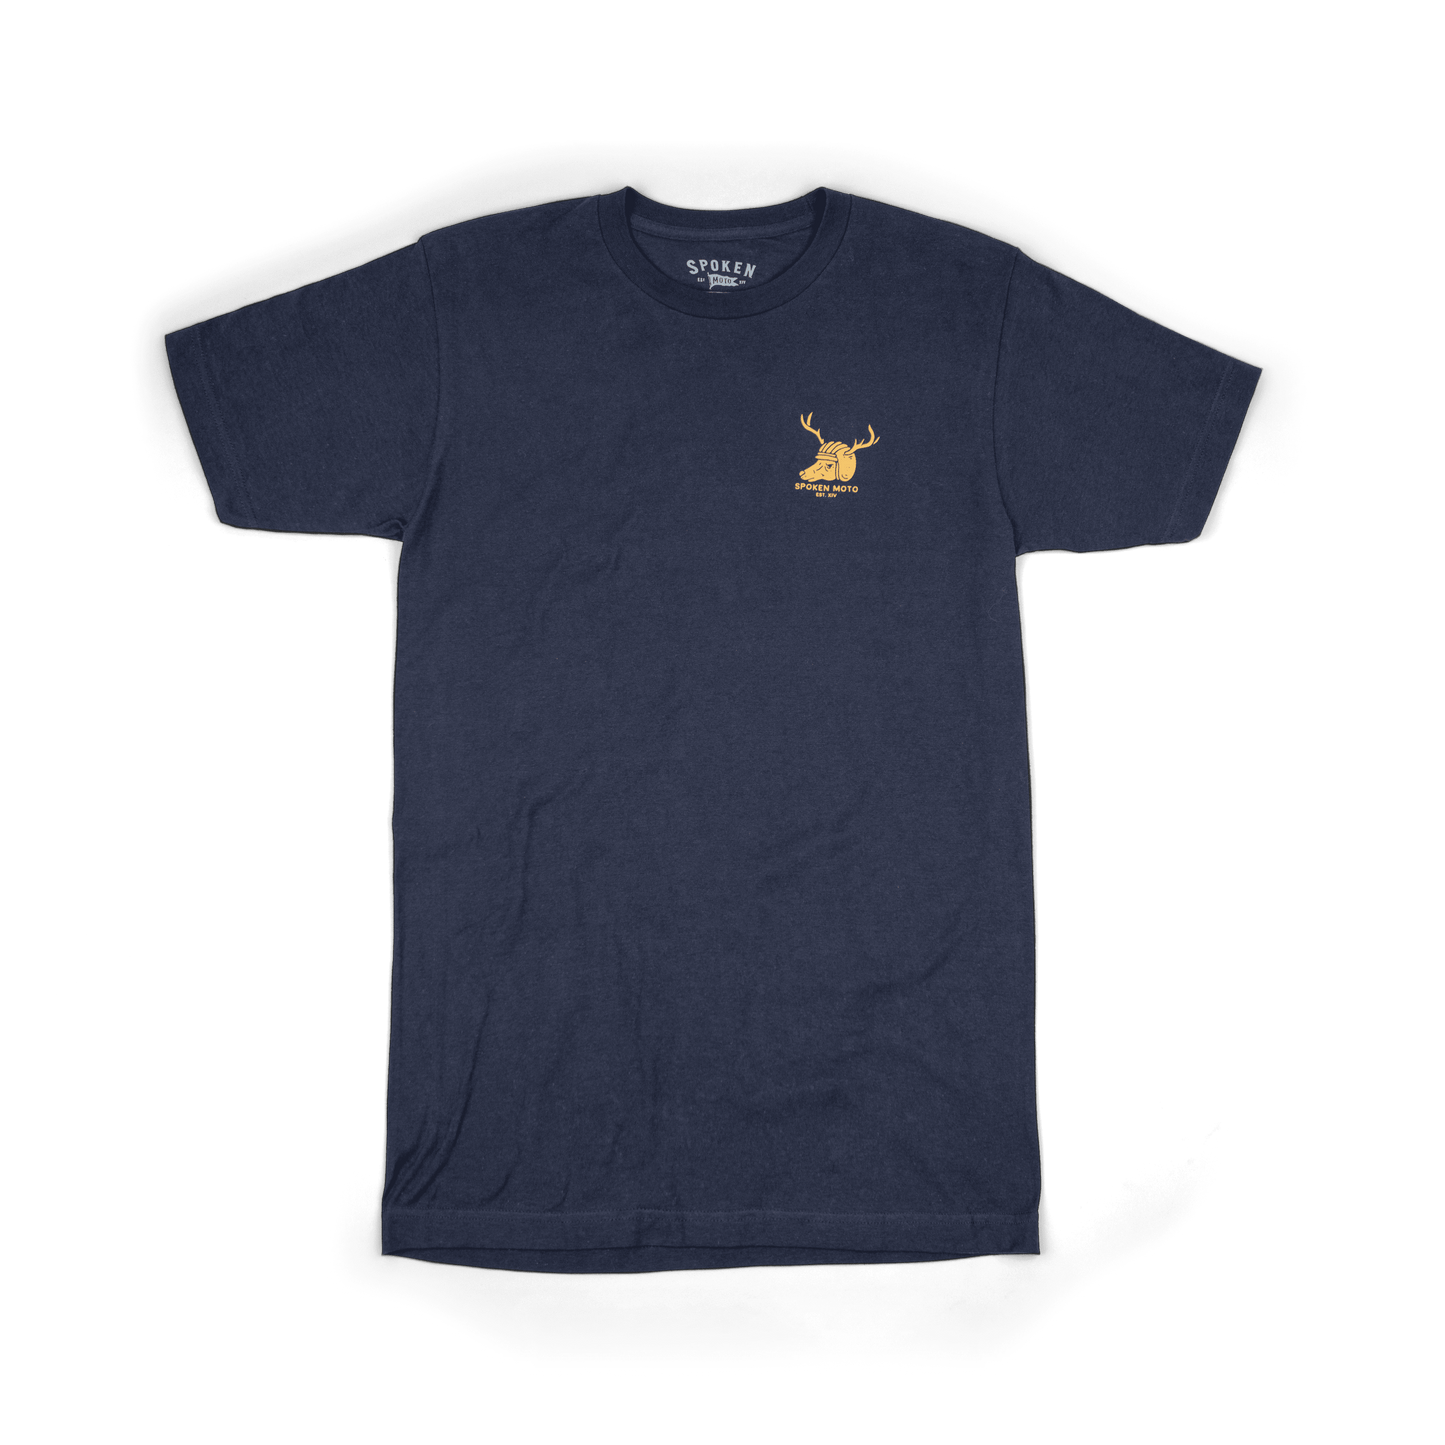 Wild in the Woods Tee from the front - navy blue tee with yellow/gold Spoken Moto deer logo on upper left chest.